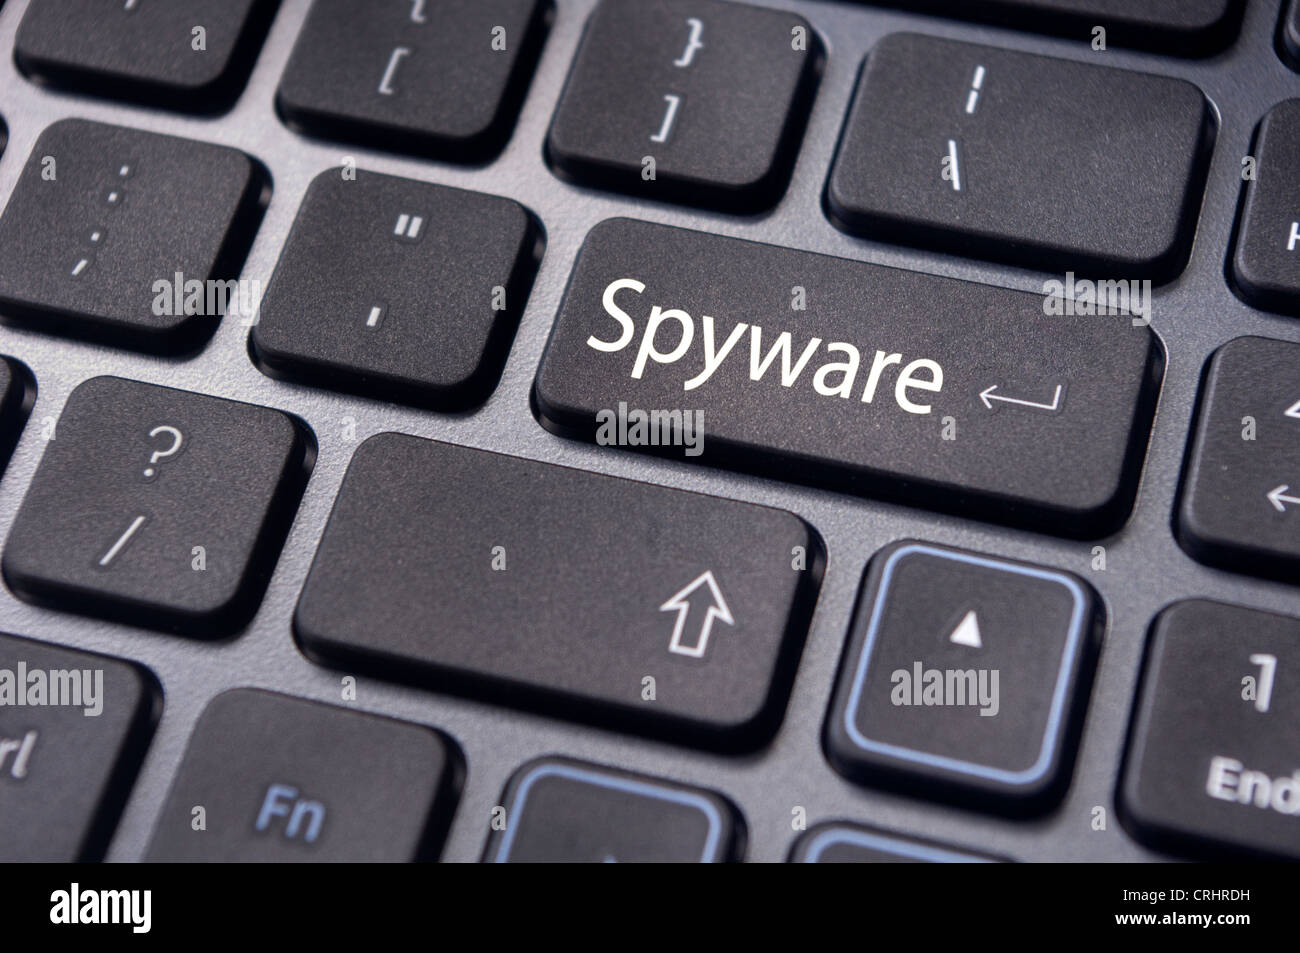 spyware concepts, with message on enter key of keyboard. Stock Photo